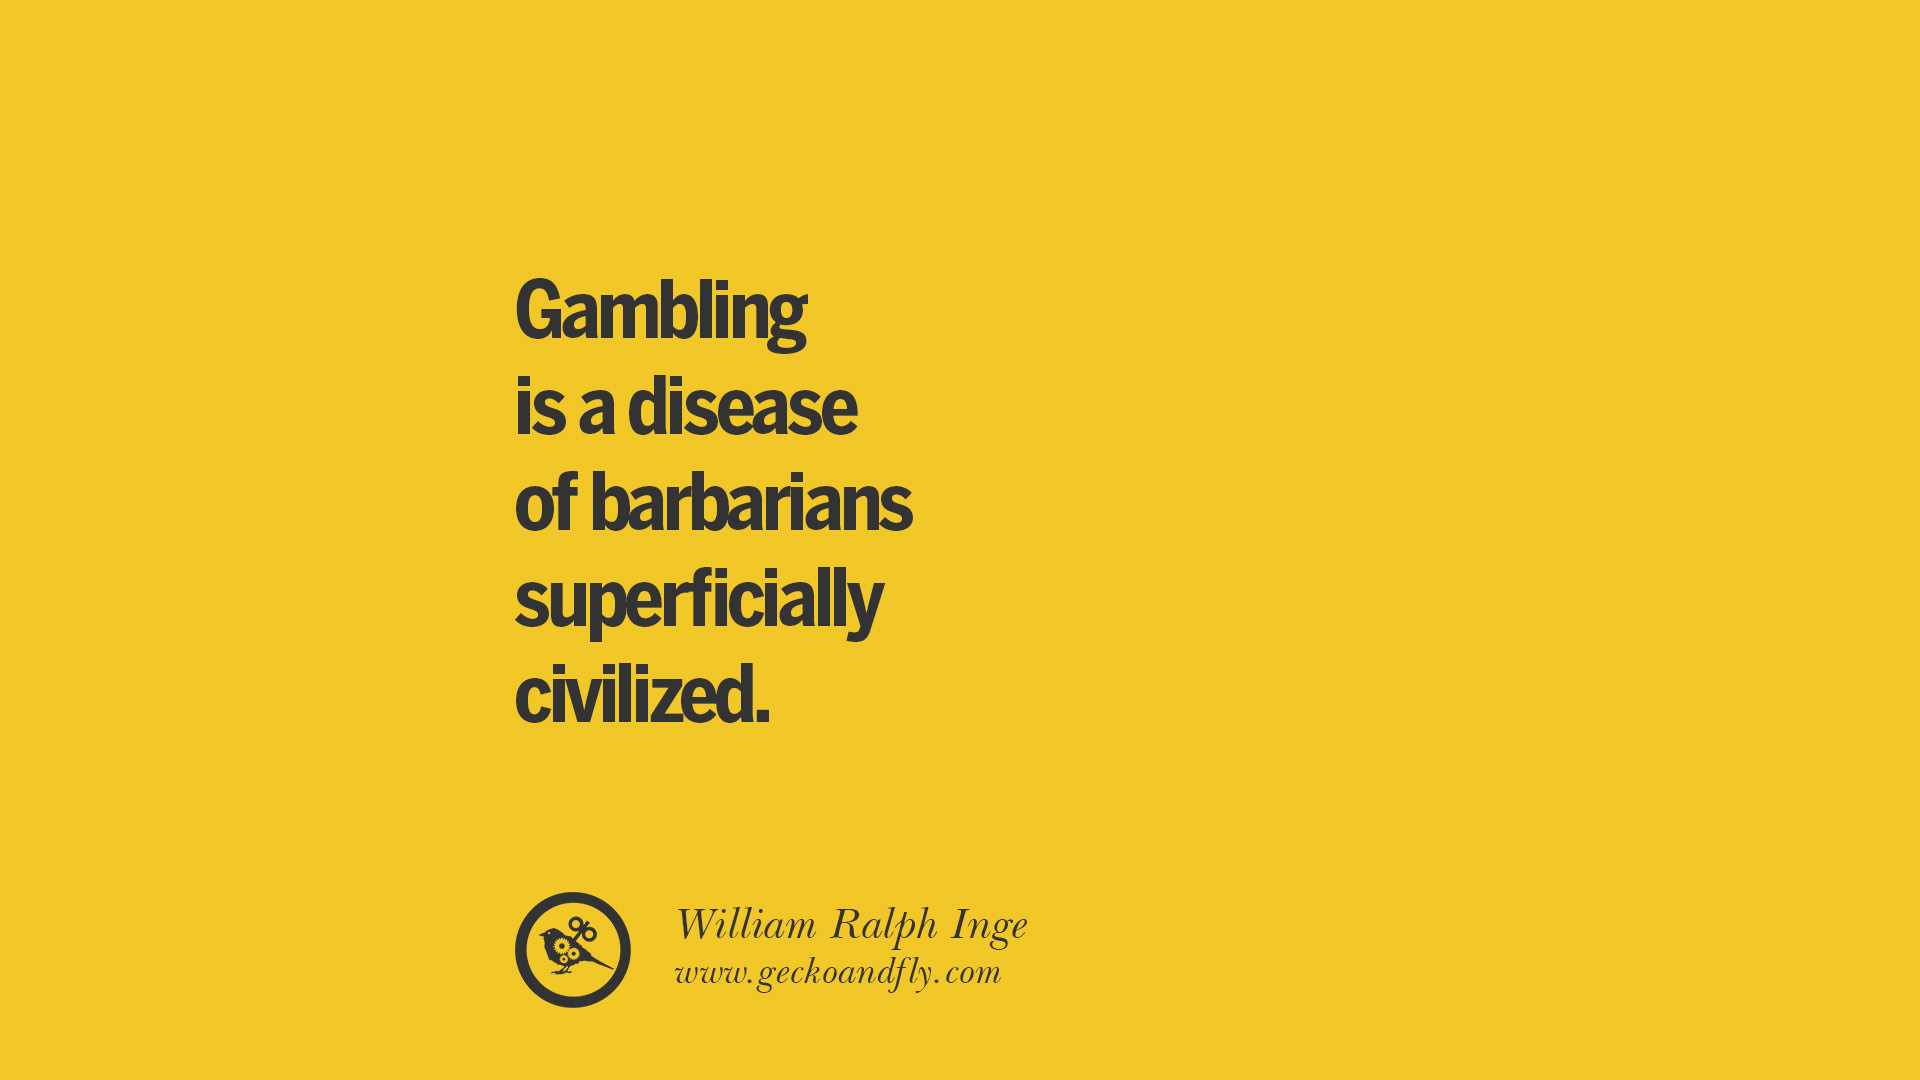 22 Anti-Gambling And Addiction Quotes - Be A Proud Quitter